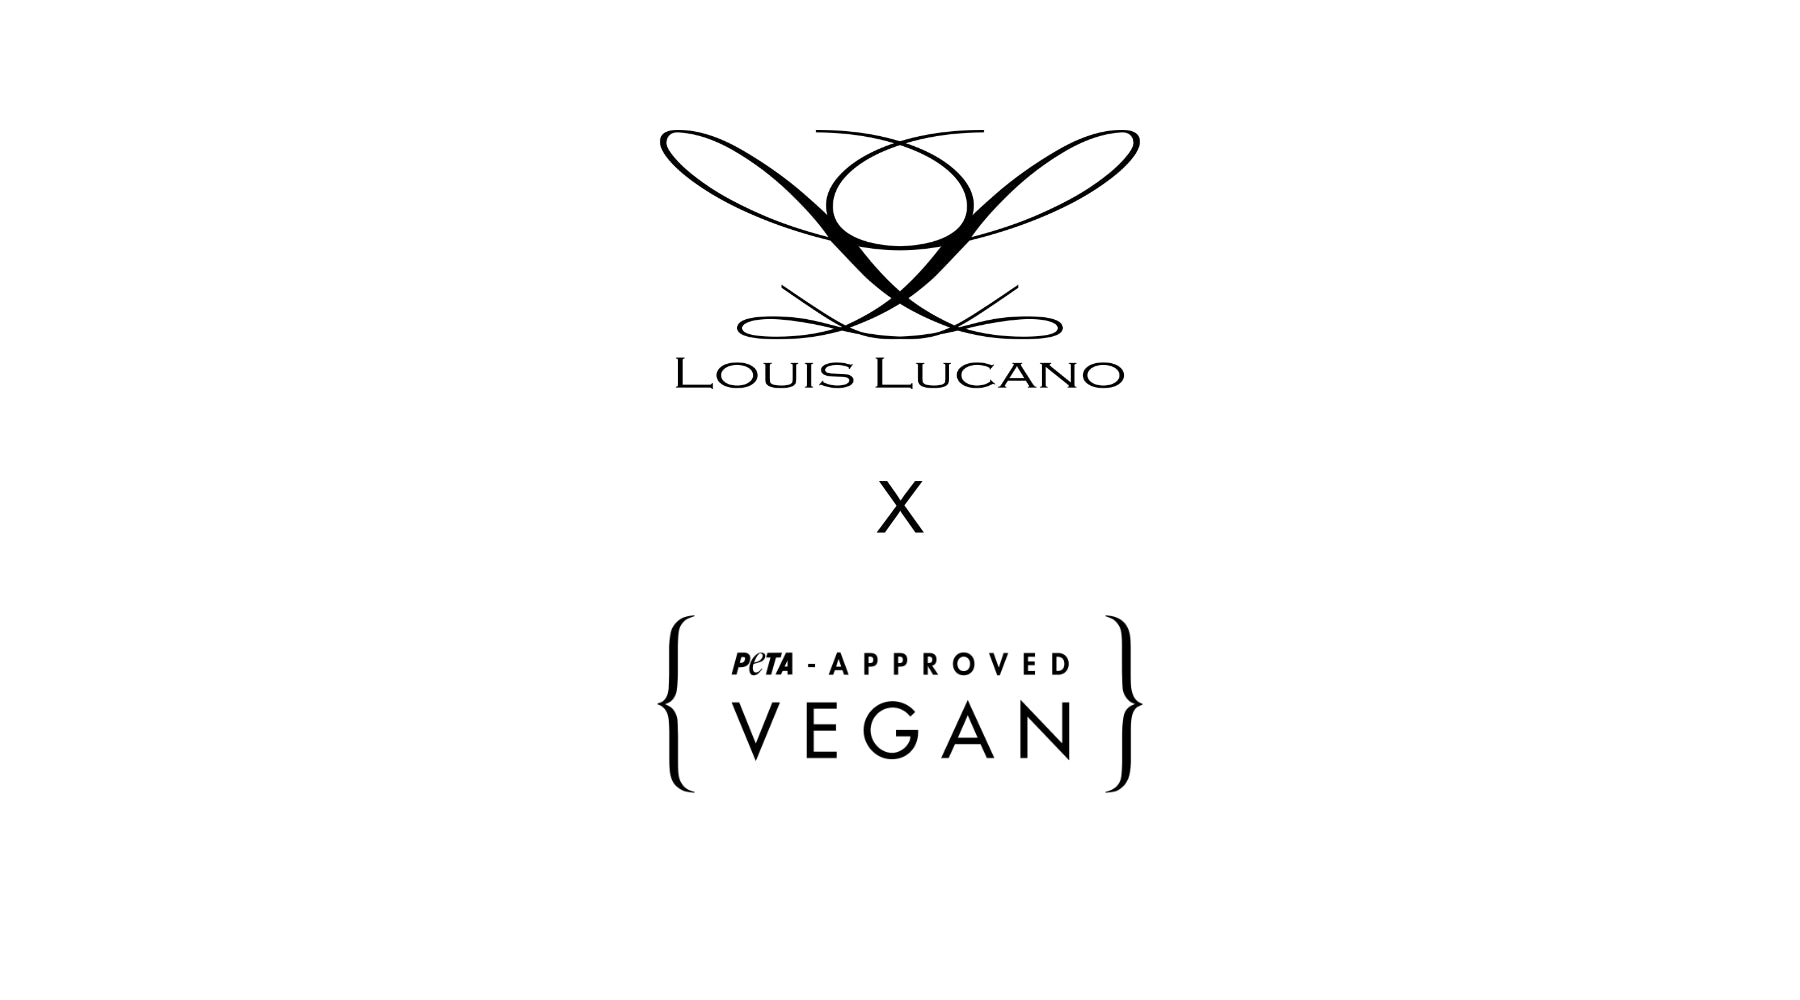 Louis Lucano is officially Peta approved